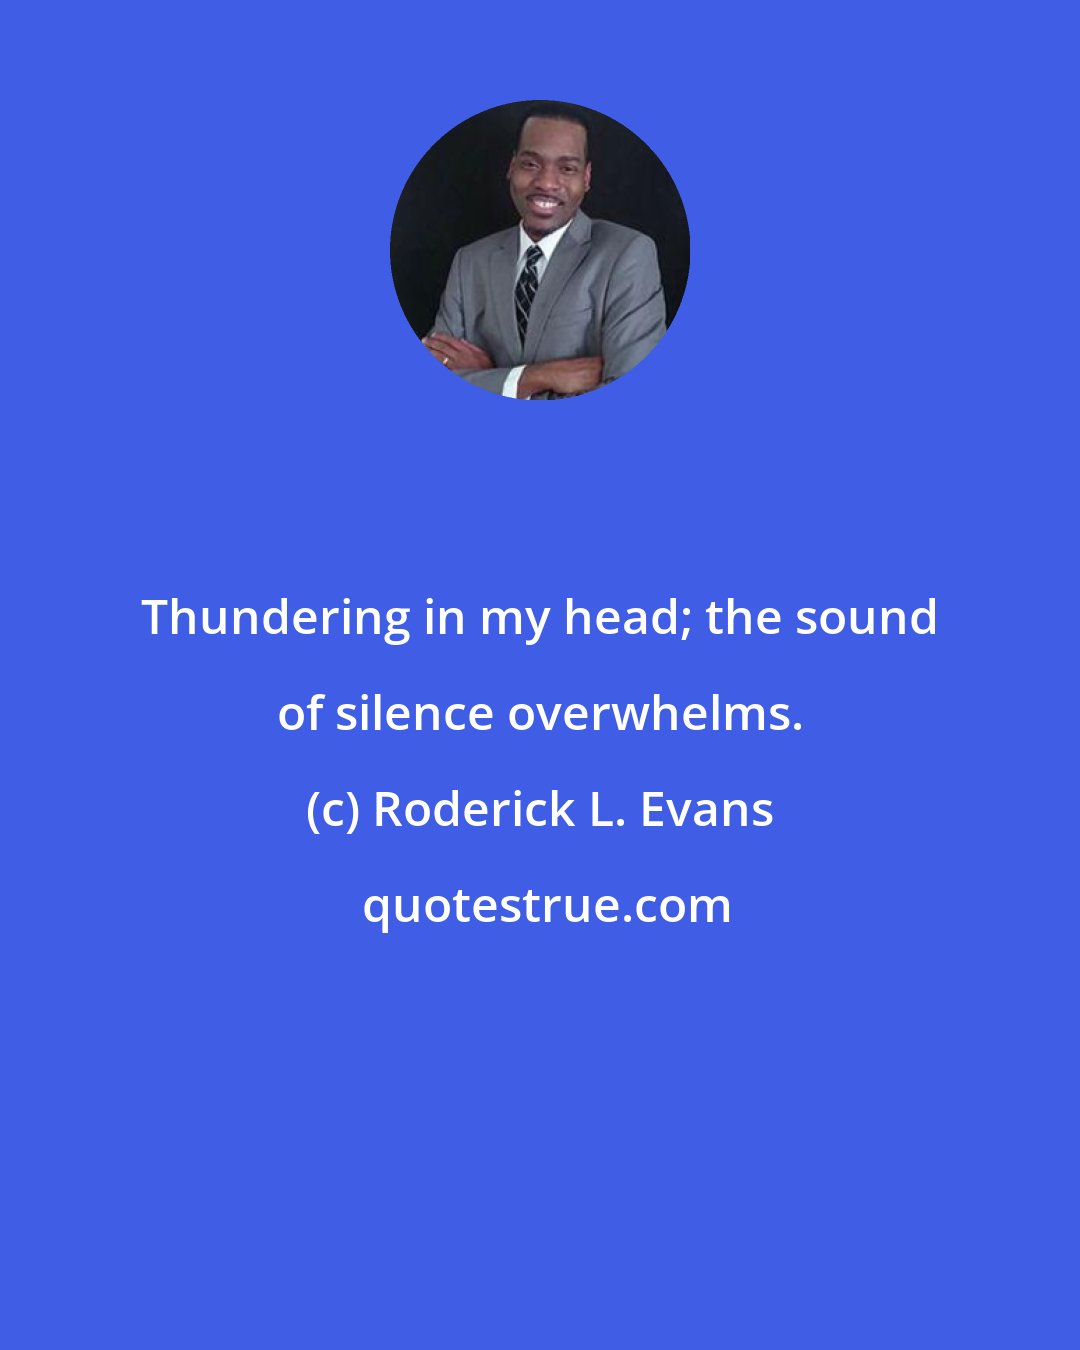 Roderick L. Evans: Thundering in my head; the sound of silence overwhelms.